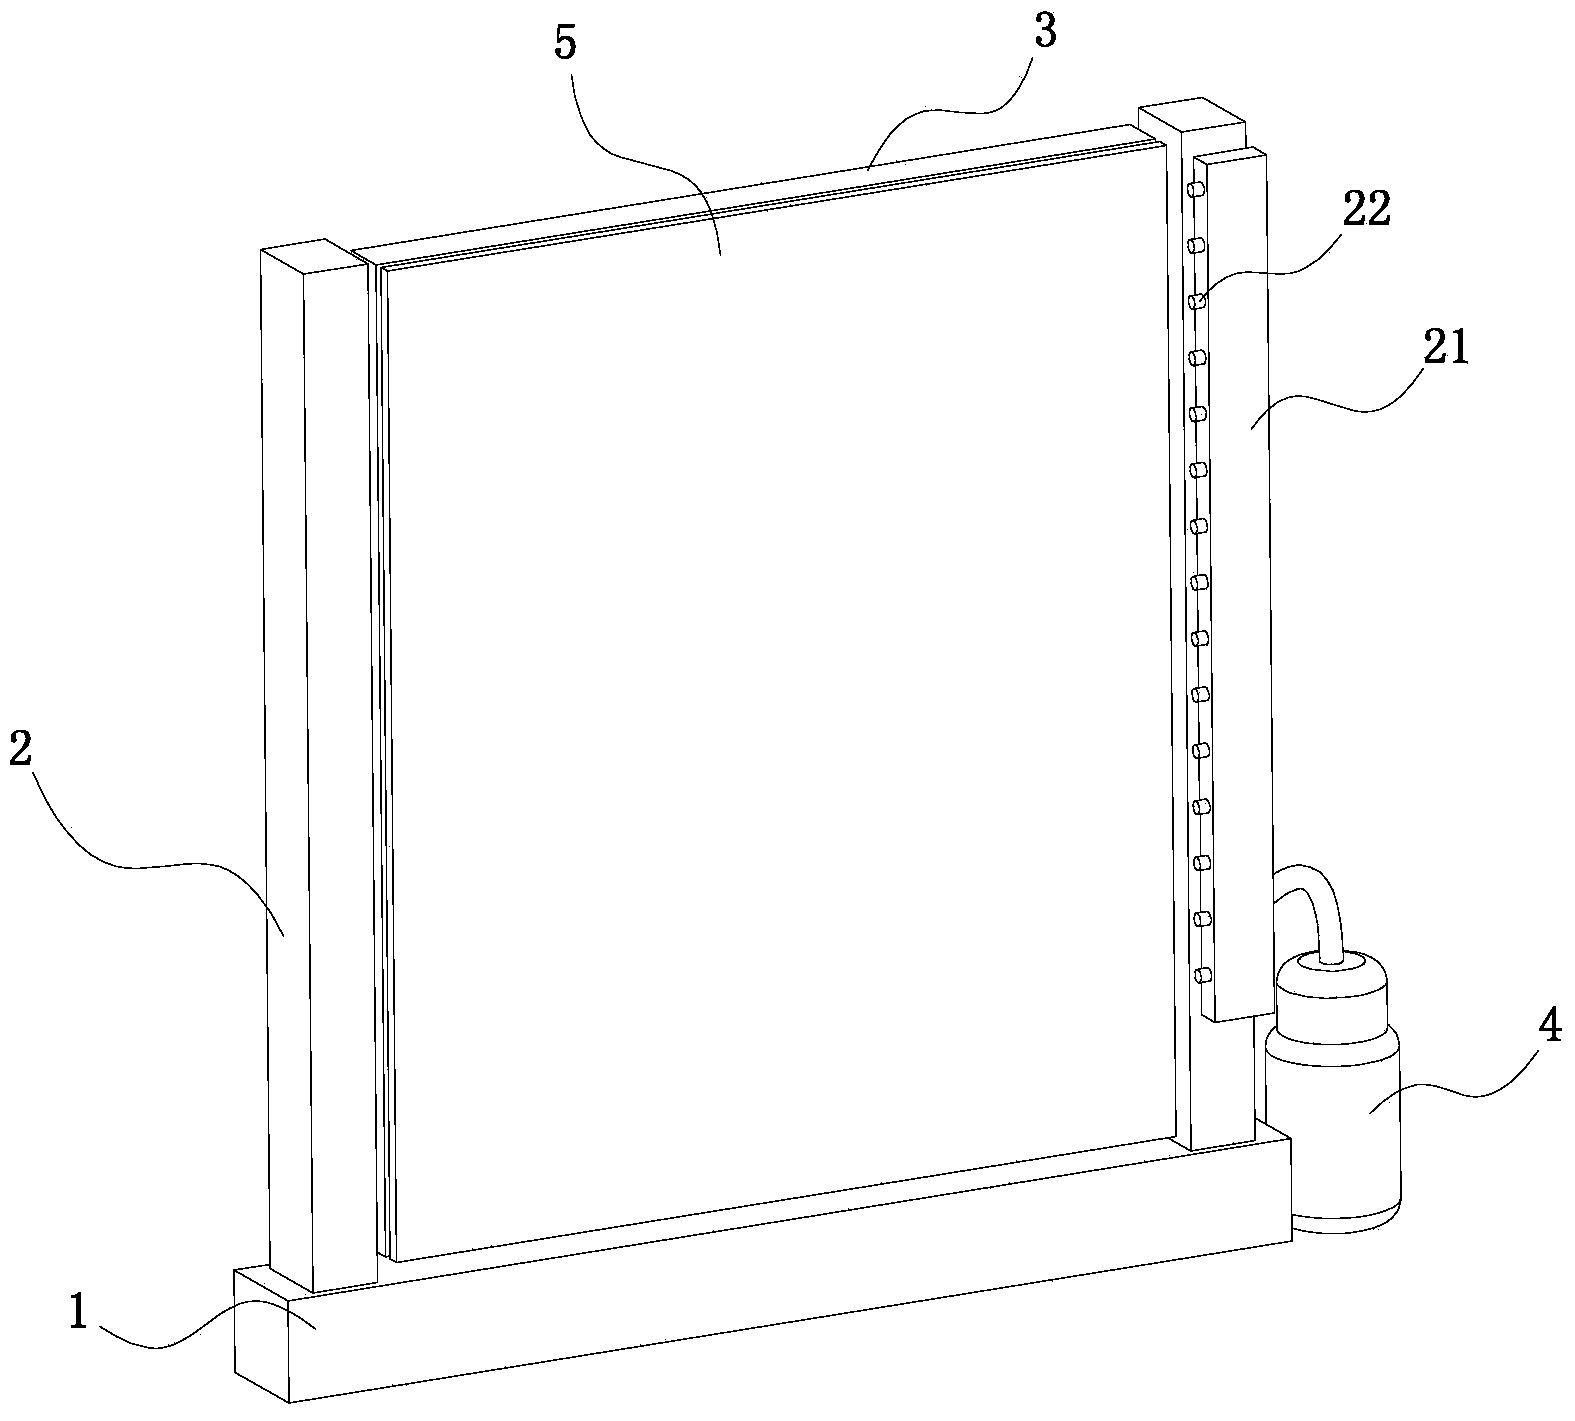 High-voltage static electricity fluctuating dust removal system having wind power assisted dust removal function